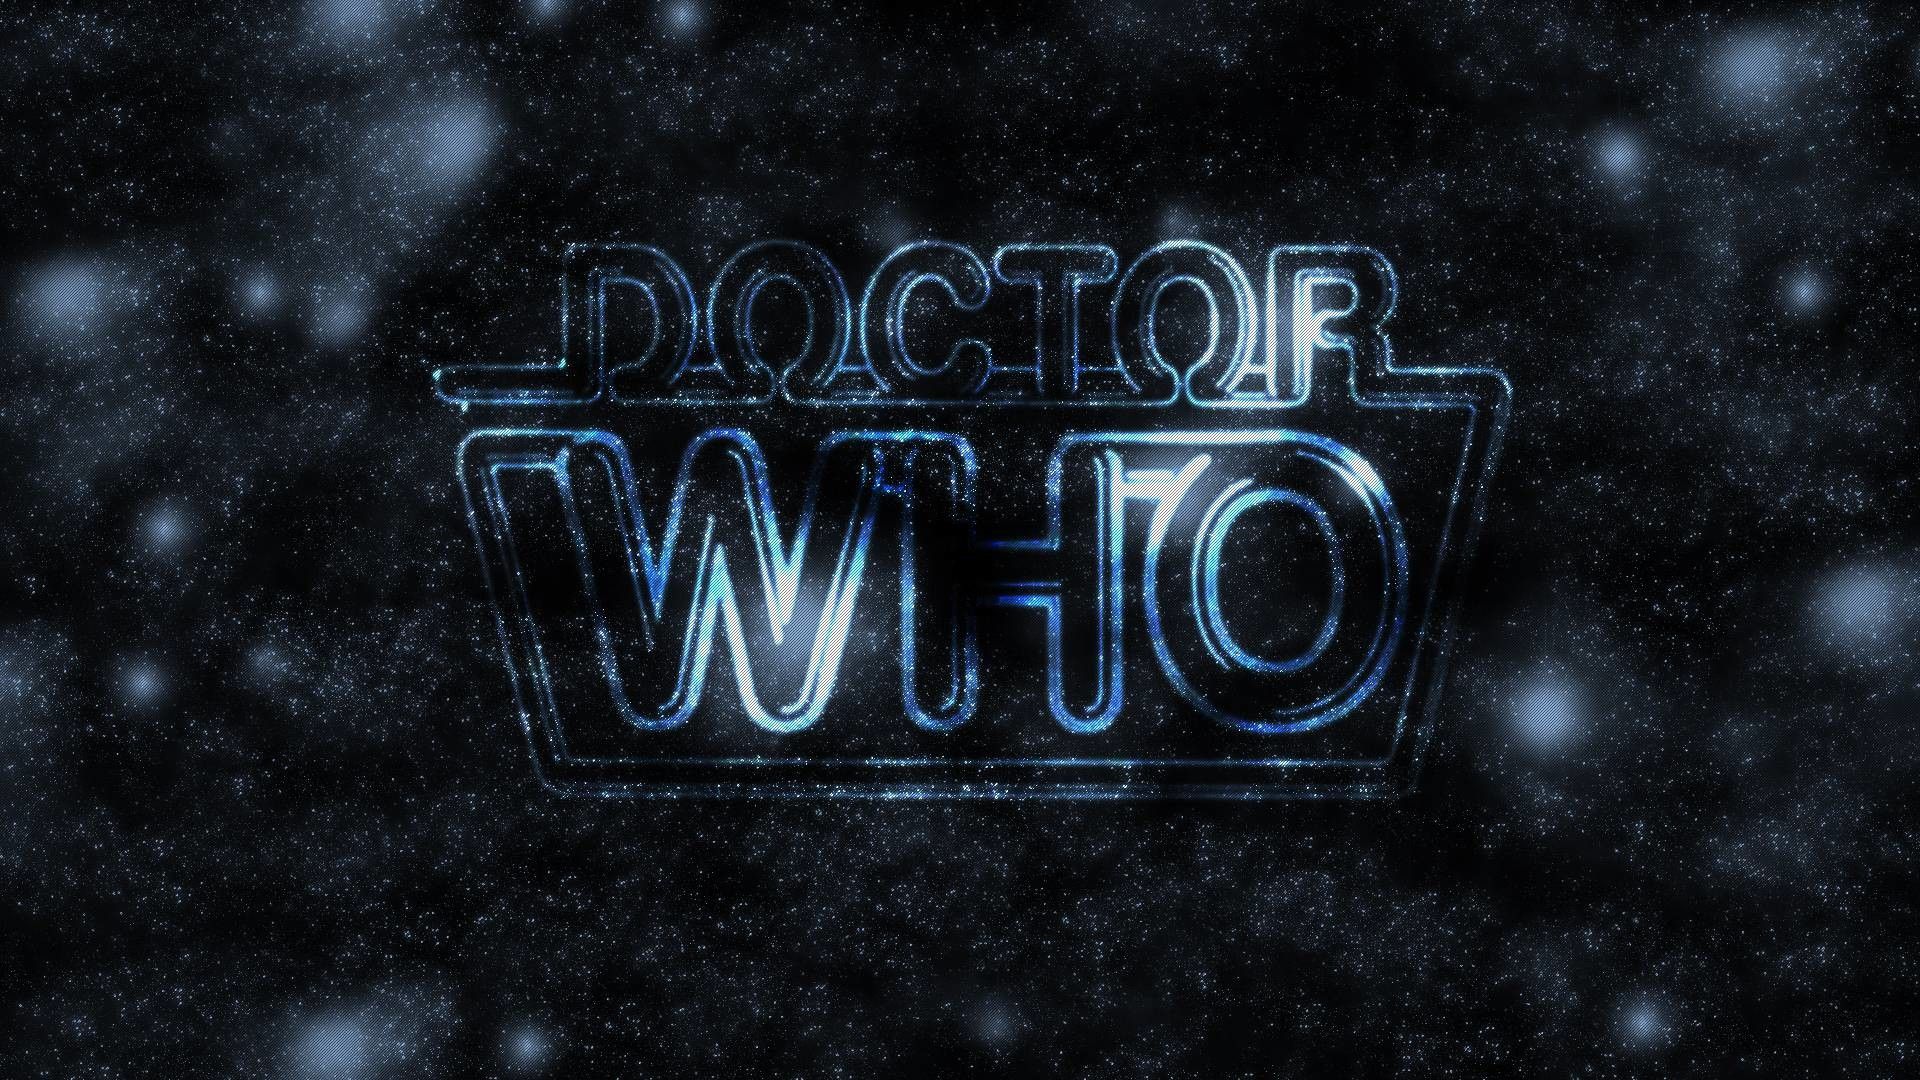 dr who phone wallpaper